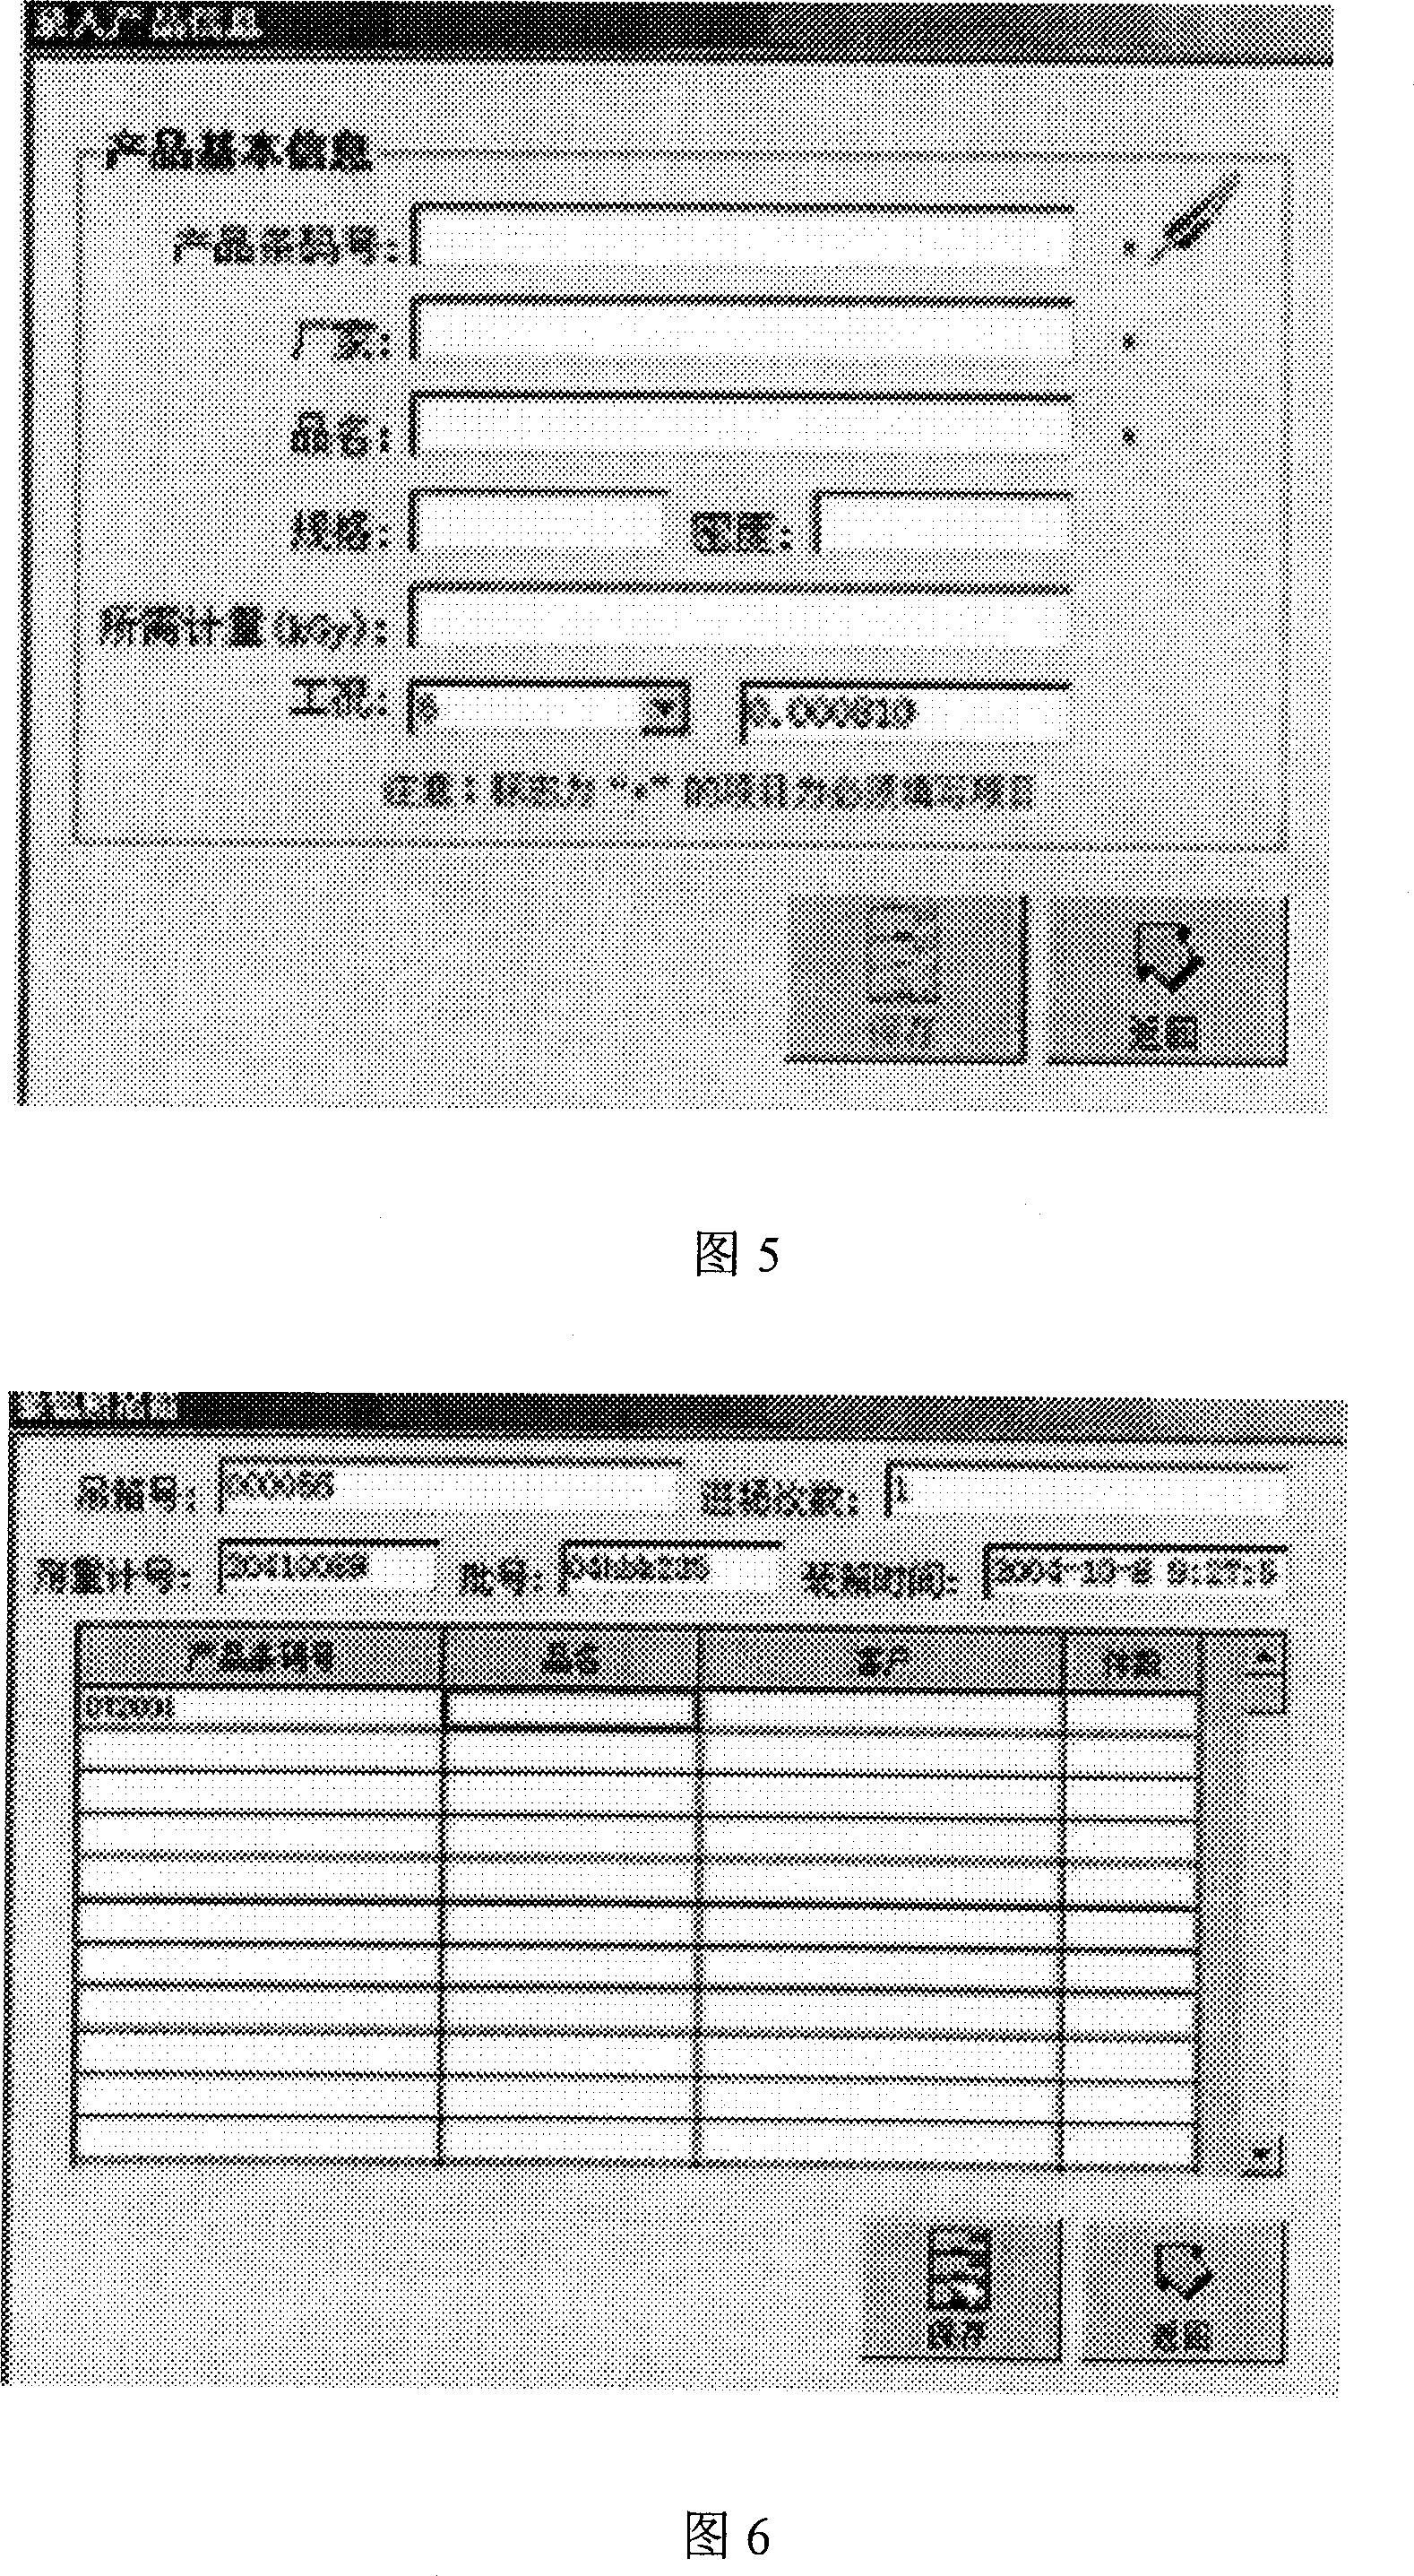 Through tracking method for radiation processing